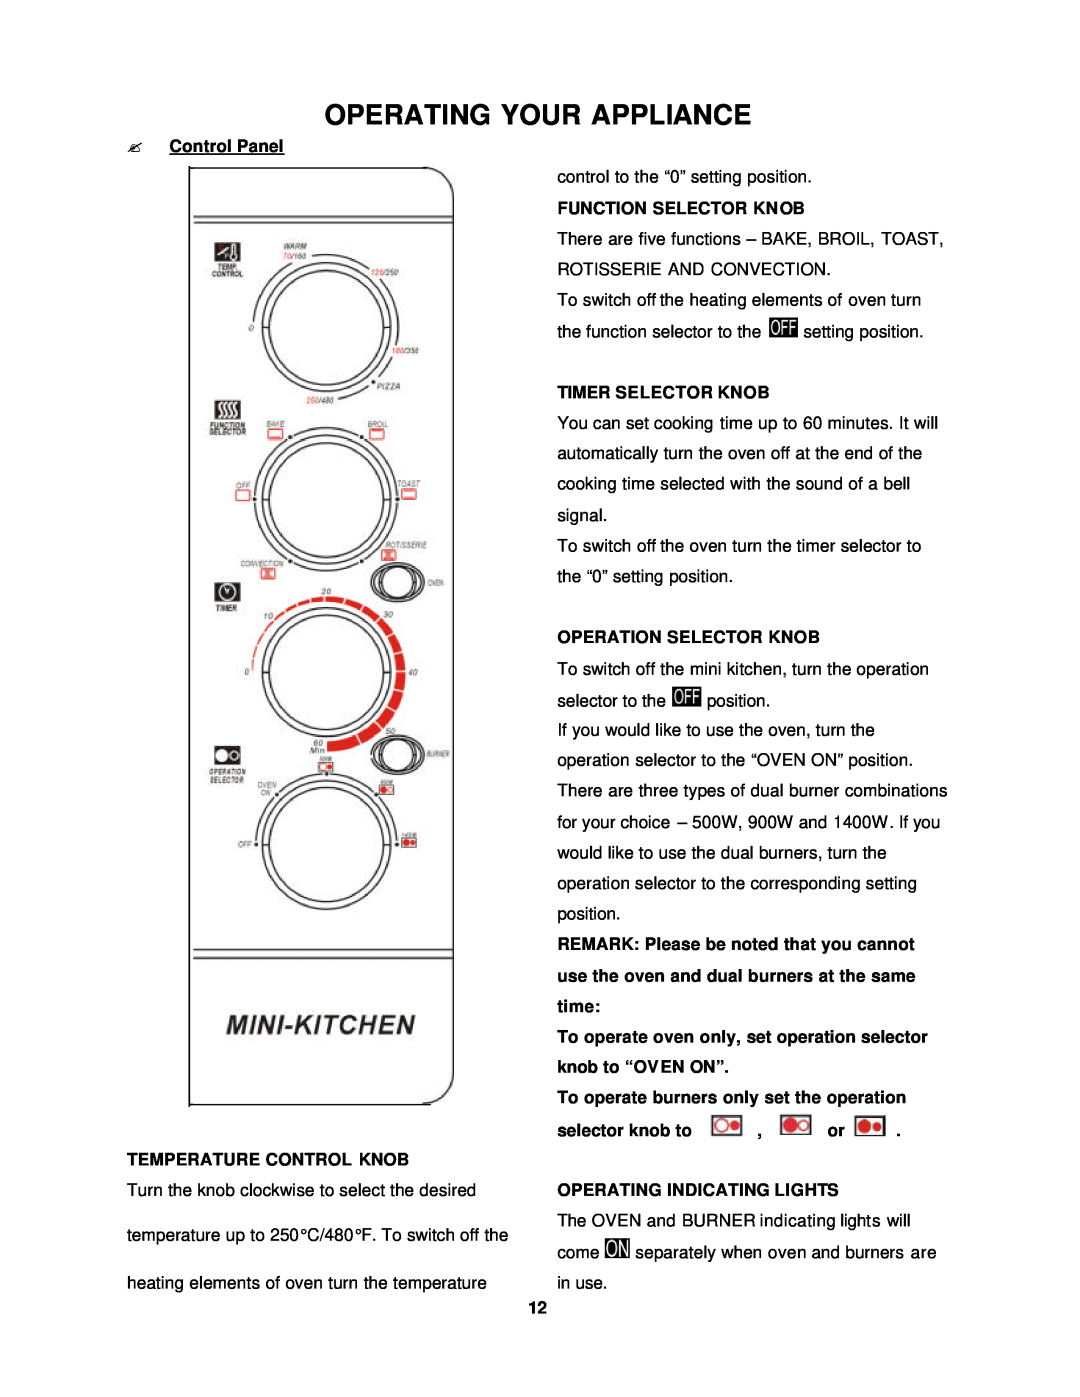 Avanti OCRB43W Operating Your Appliance, ? Control Panel TEMPERATURE CONTROL KNOB, Function Selector Knob 